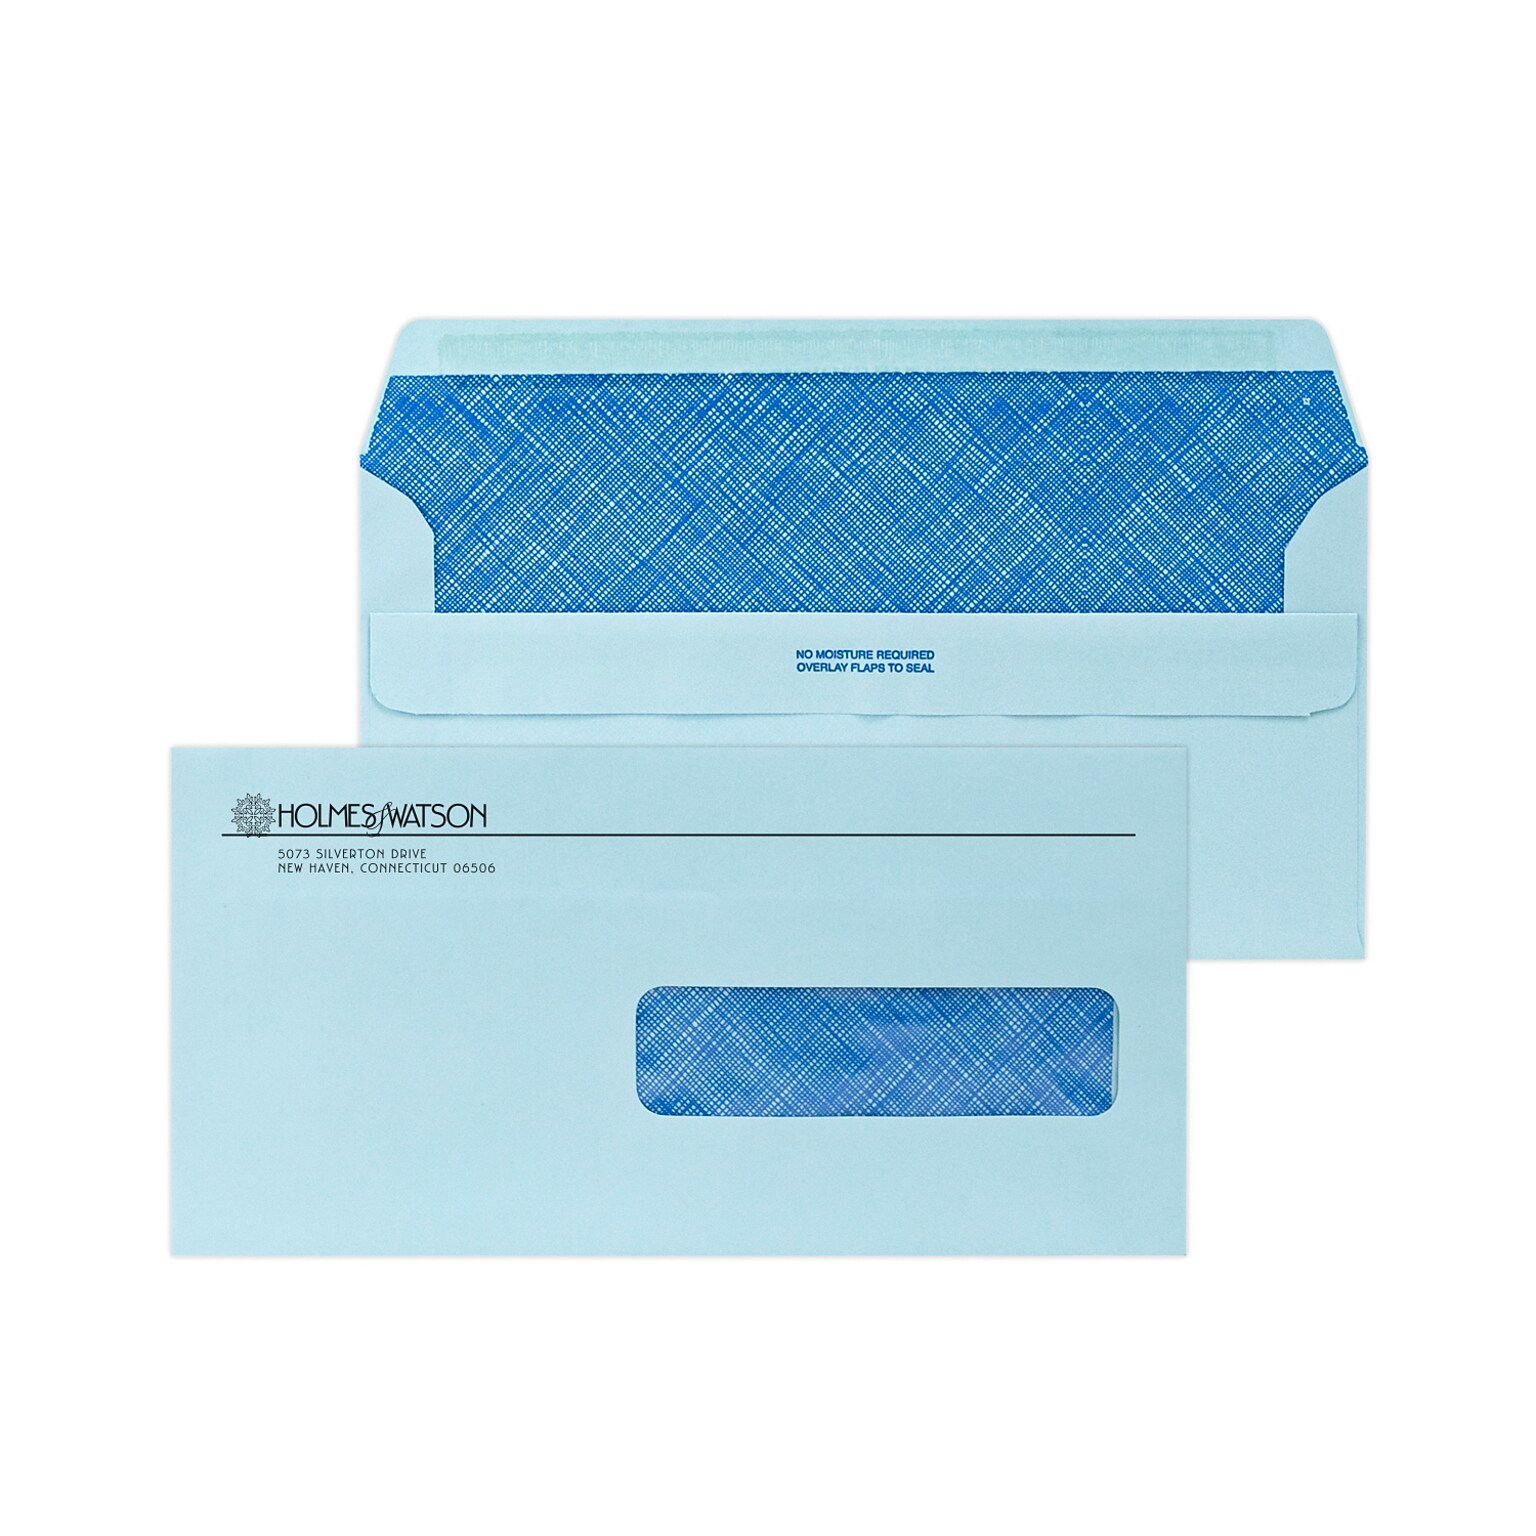 Custom 4-1/2 x 9 Insurance Claim Self Seal Right Window Envelopes with Security Tint, 24# Blue Wove, 1 Standard Ink, 250/Pack